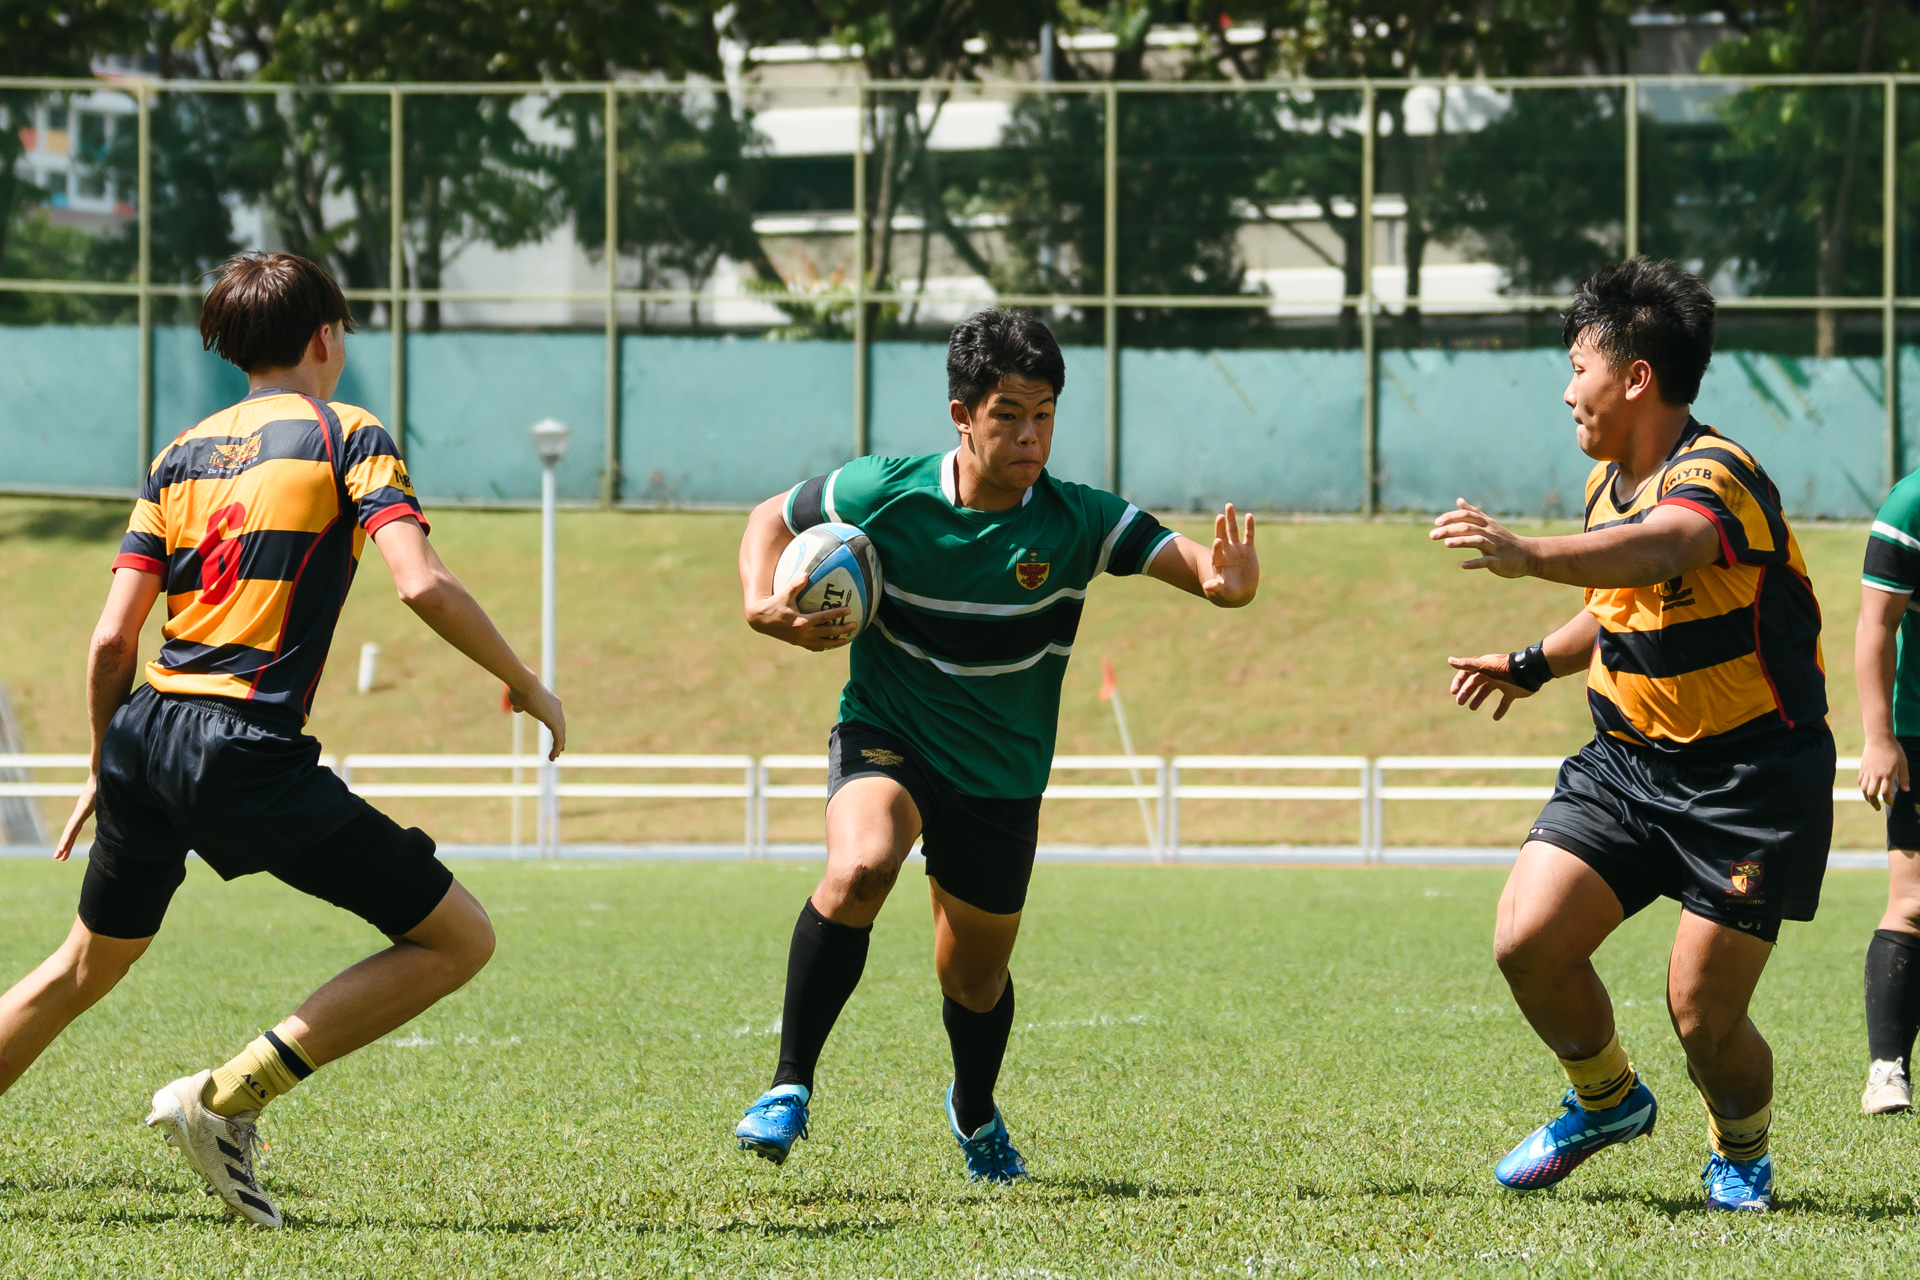 RI’s flyhalf Daniel Park (#10) spots a gap and looks to fend off an ACS(I) player. (Photo 4 © Joash Chow/Red Sports)